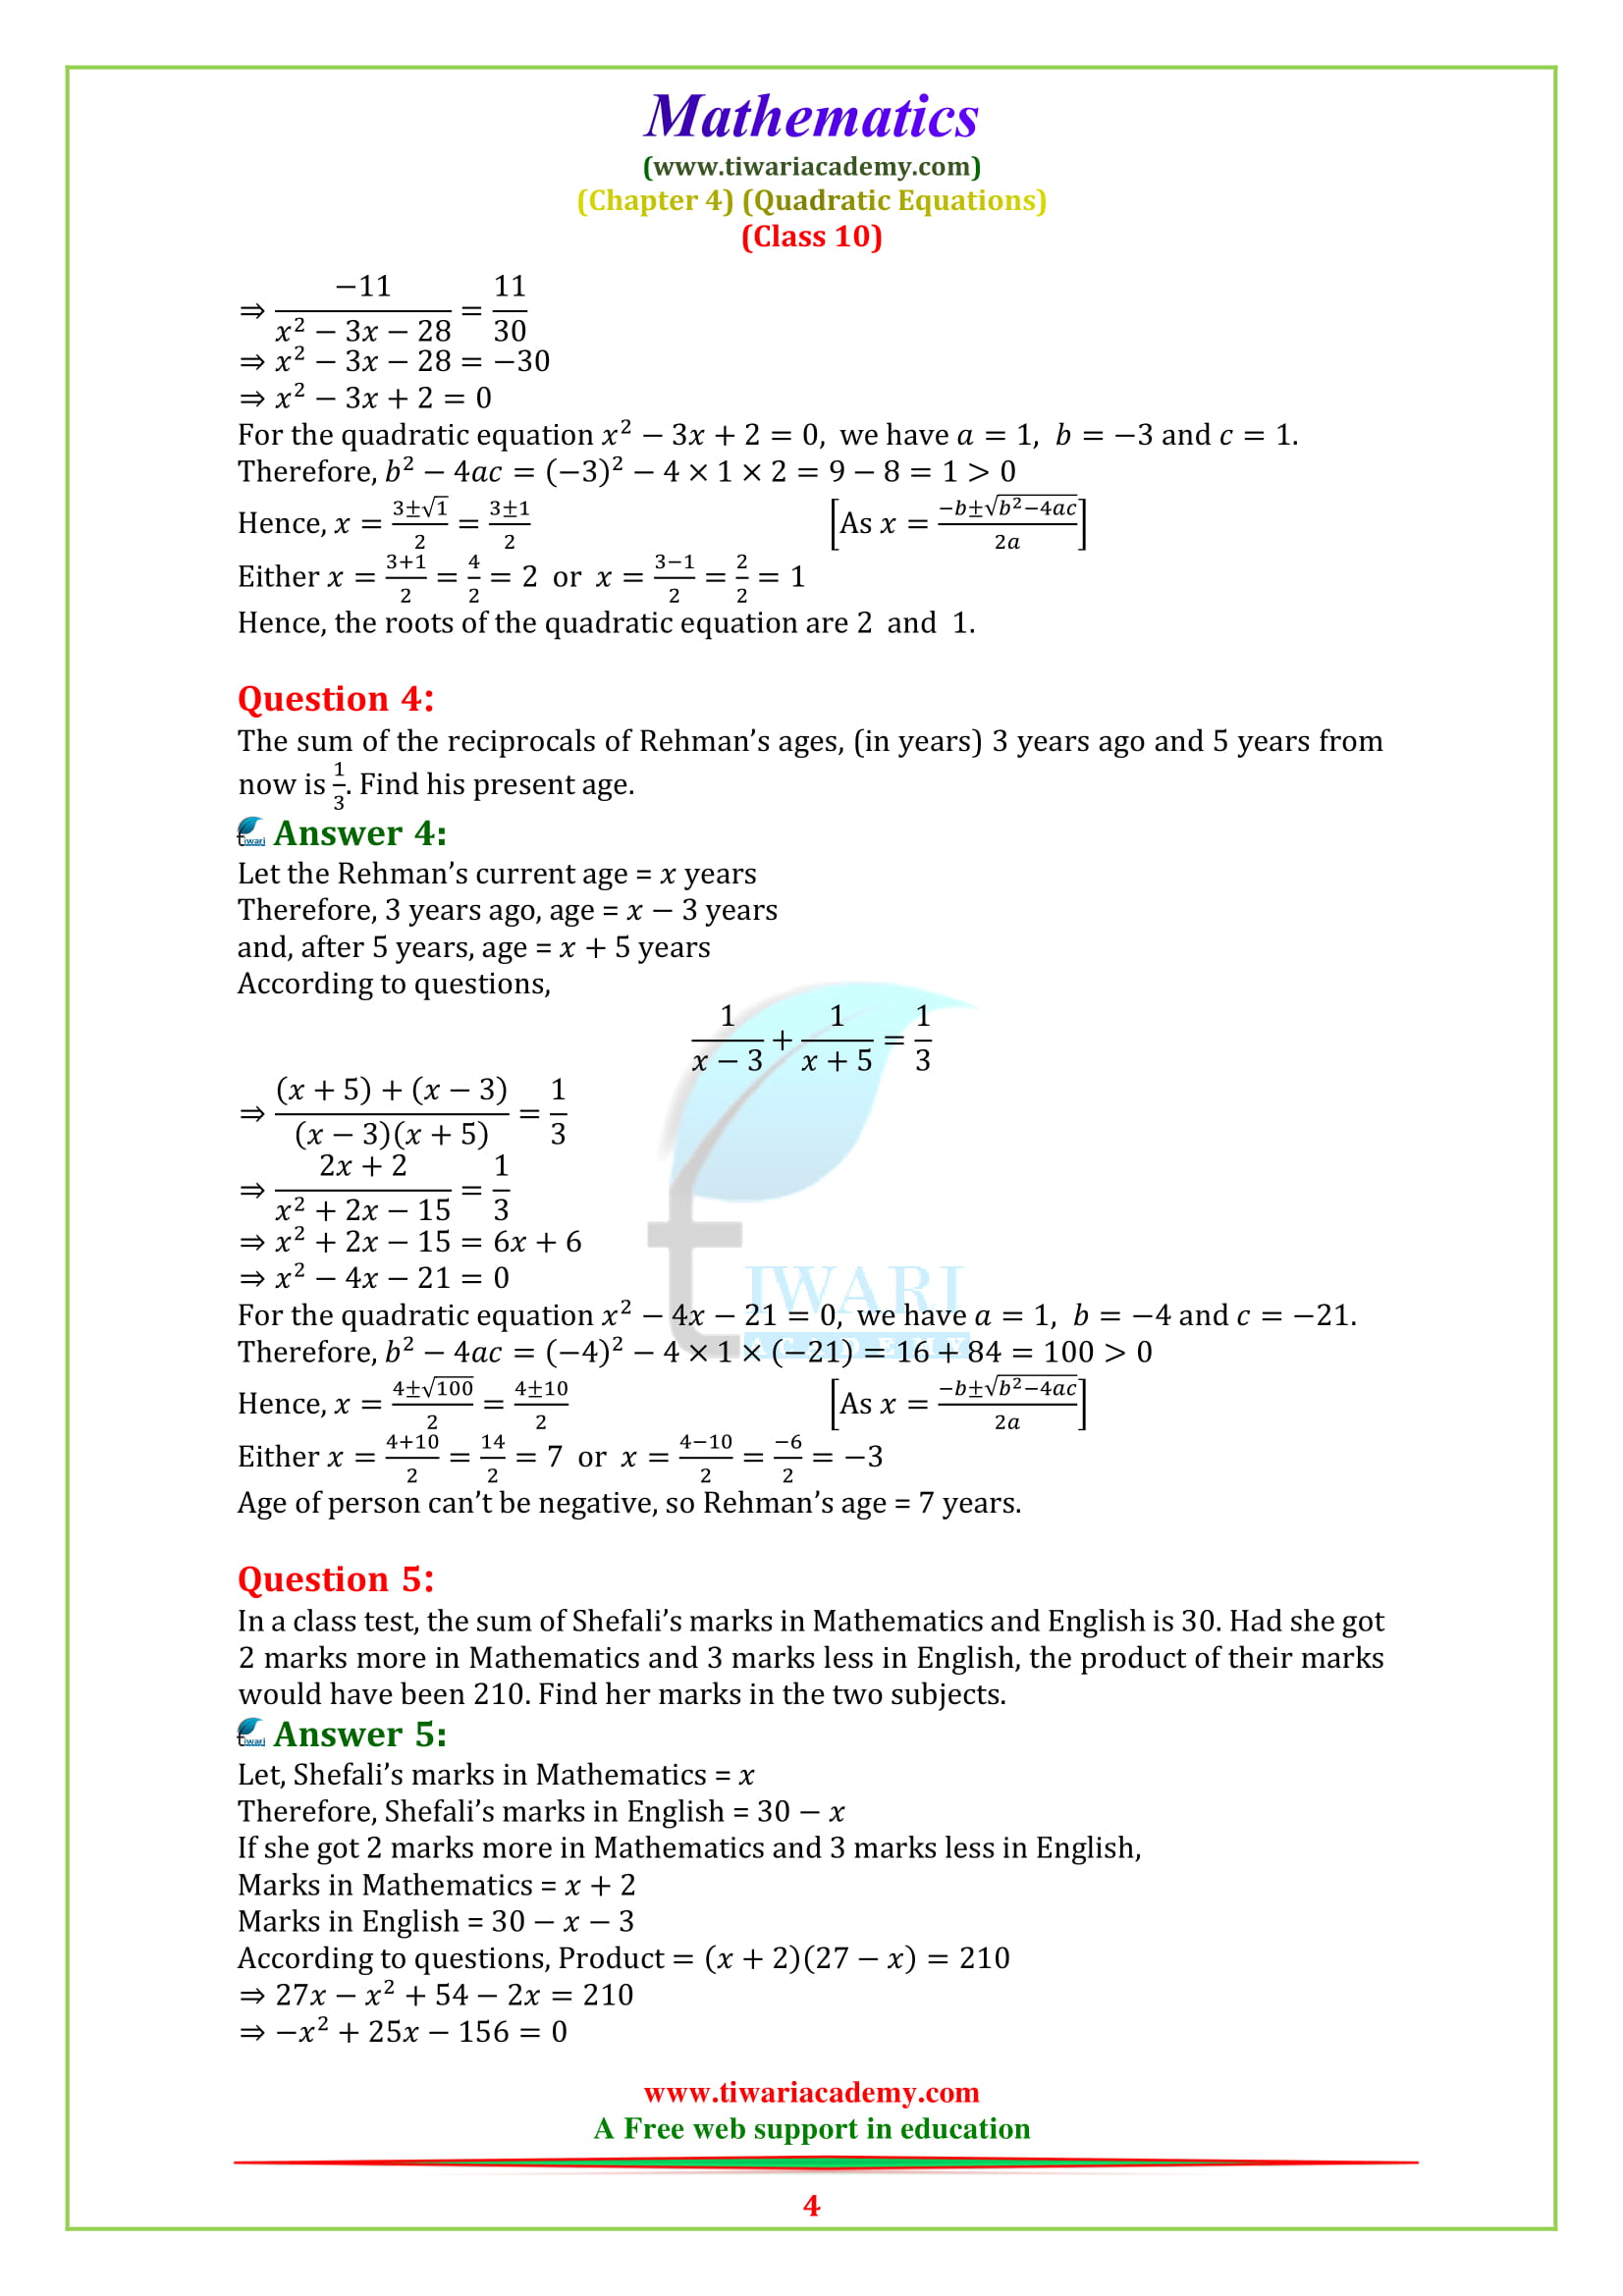 NCERT Solutions for Class 10 Maths Chapter 4 Exercise 4.3 in PDF form